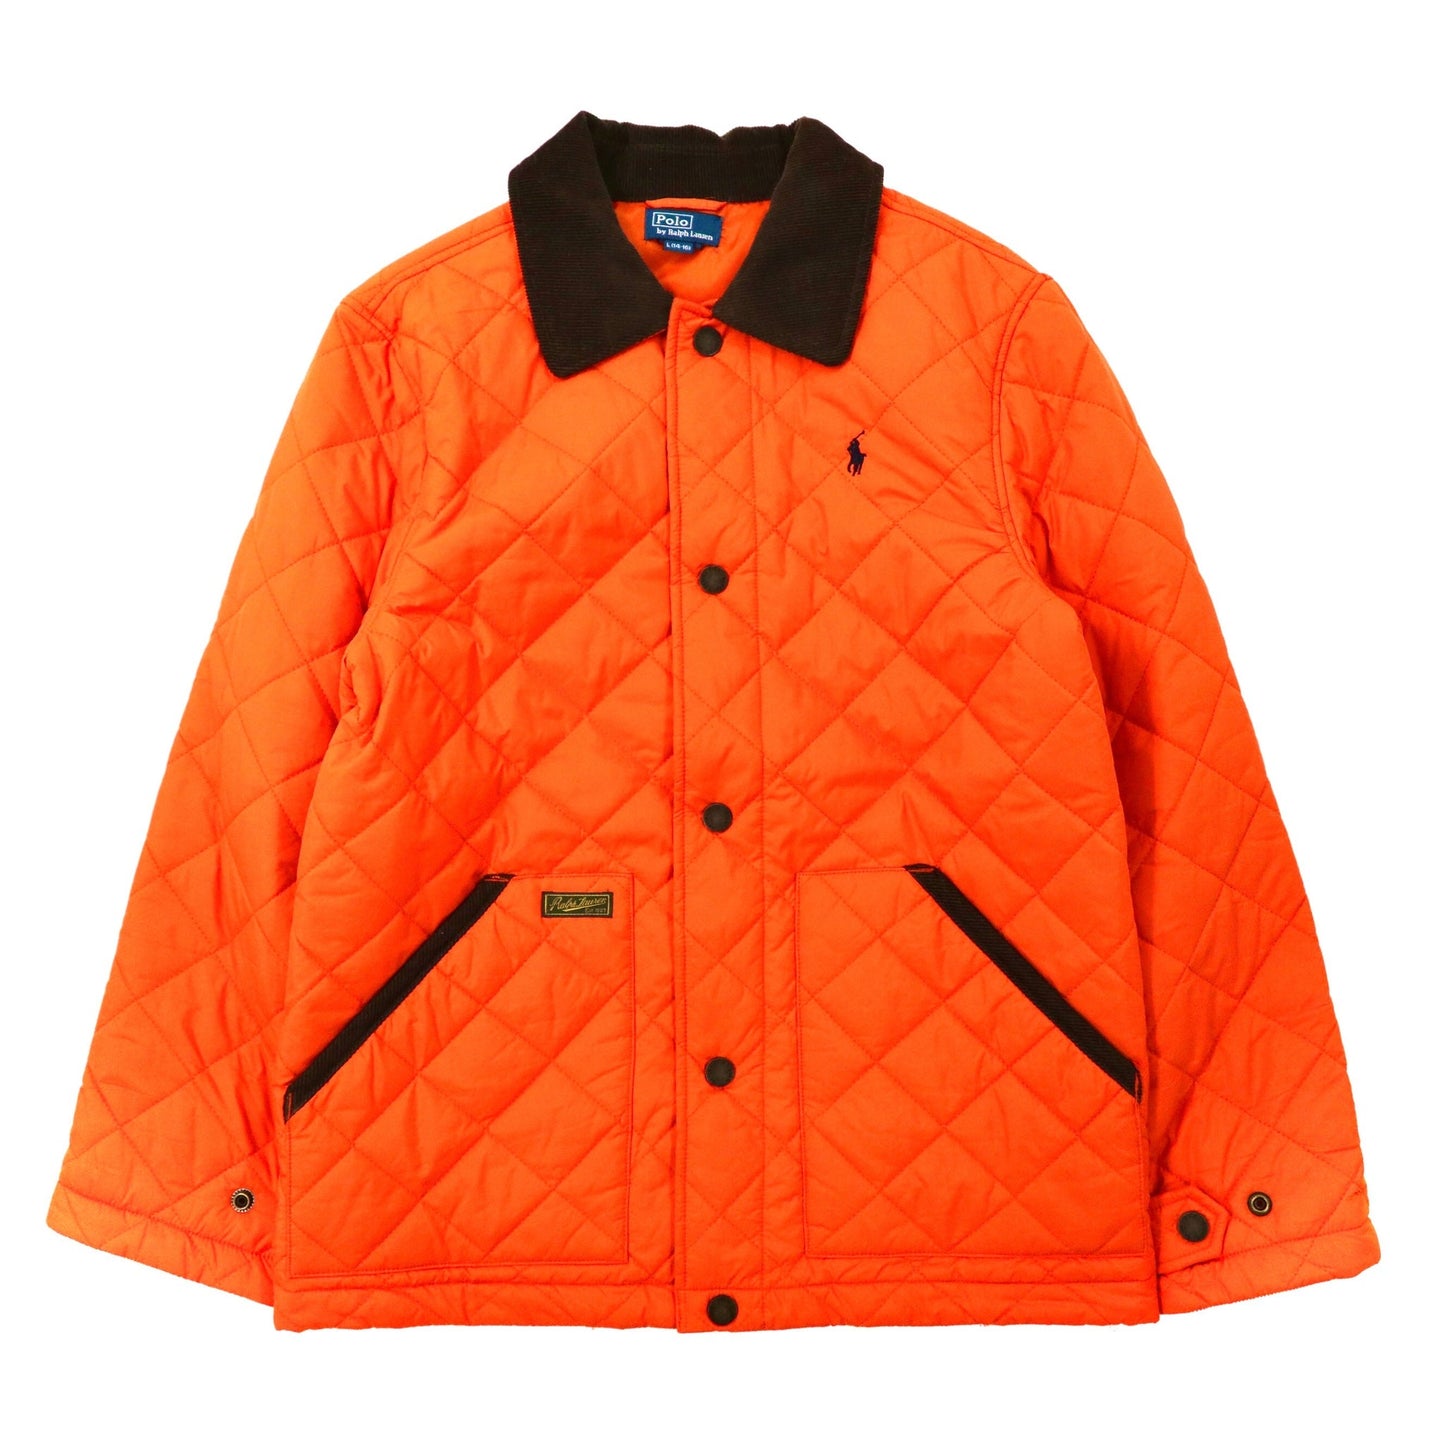 POLO BY RALPH LAUREN QUILTED JACKET L Orange Corduroy Collar Small